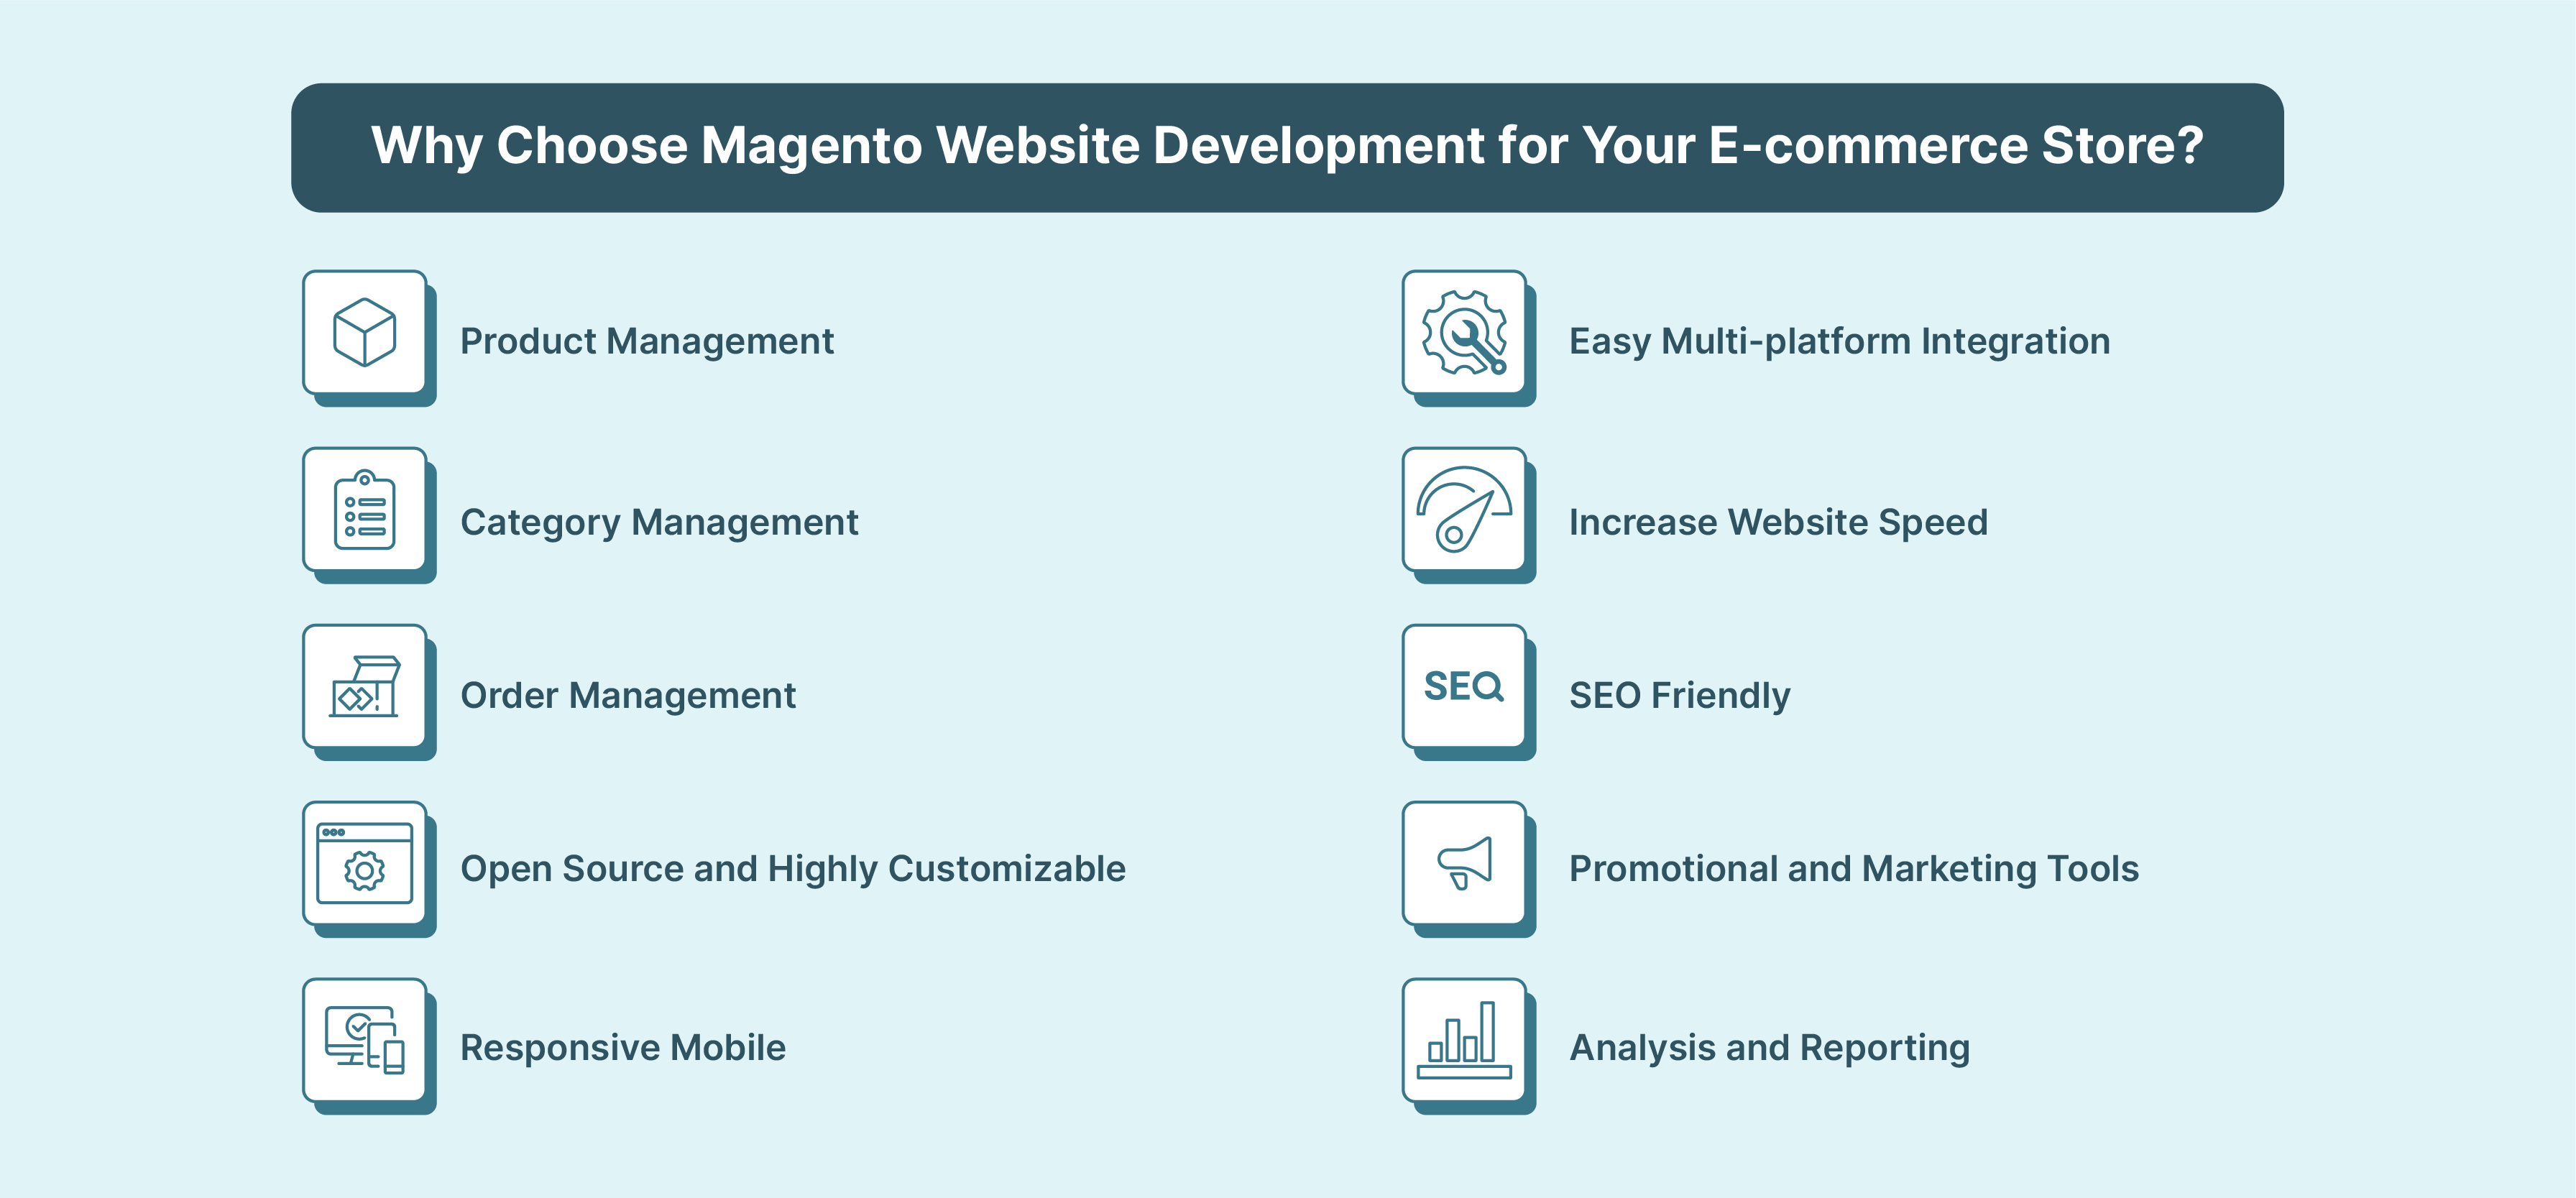 Benefits of Magento for E-commerce Stores